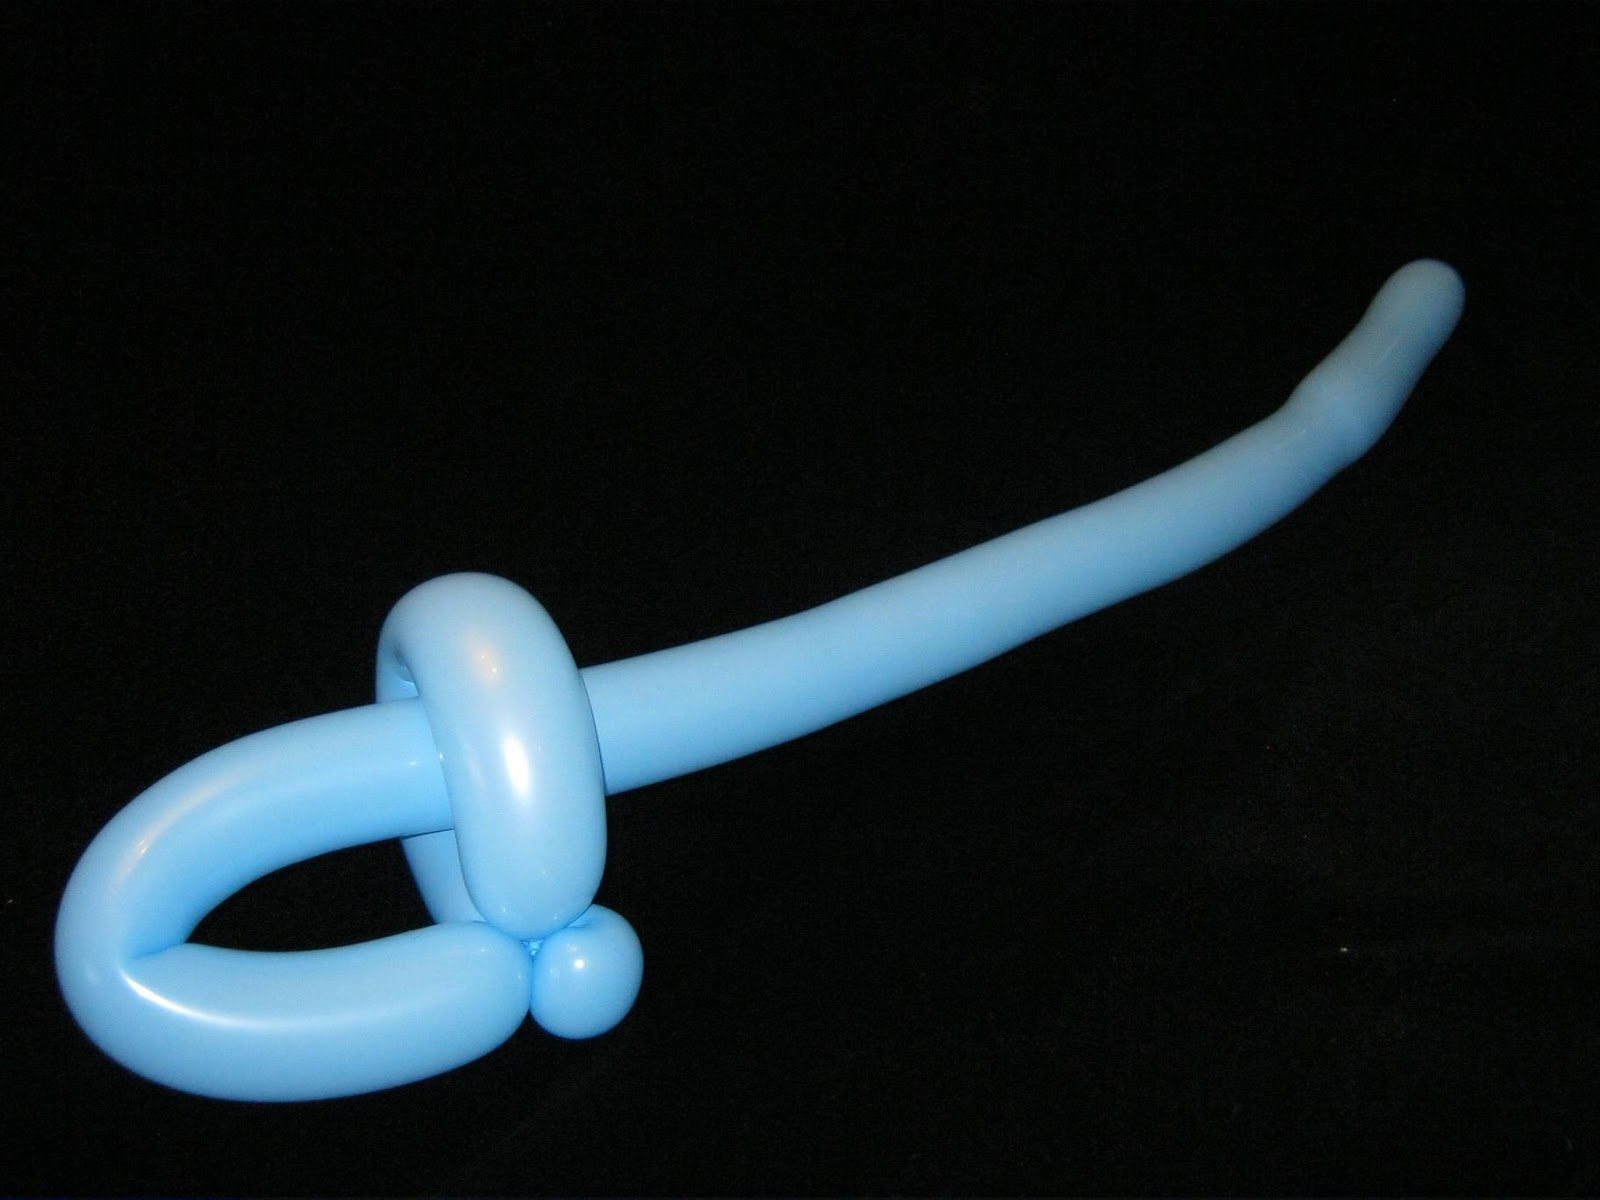 Balloon Animals With One Balloon How To Make A Balloon Sword,Muscadine Wine Recipe Without Sugar